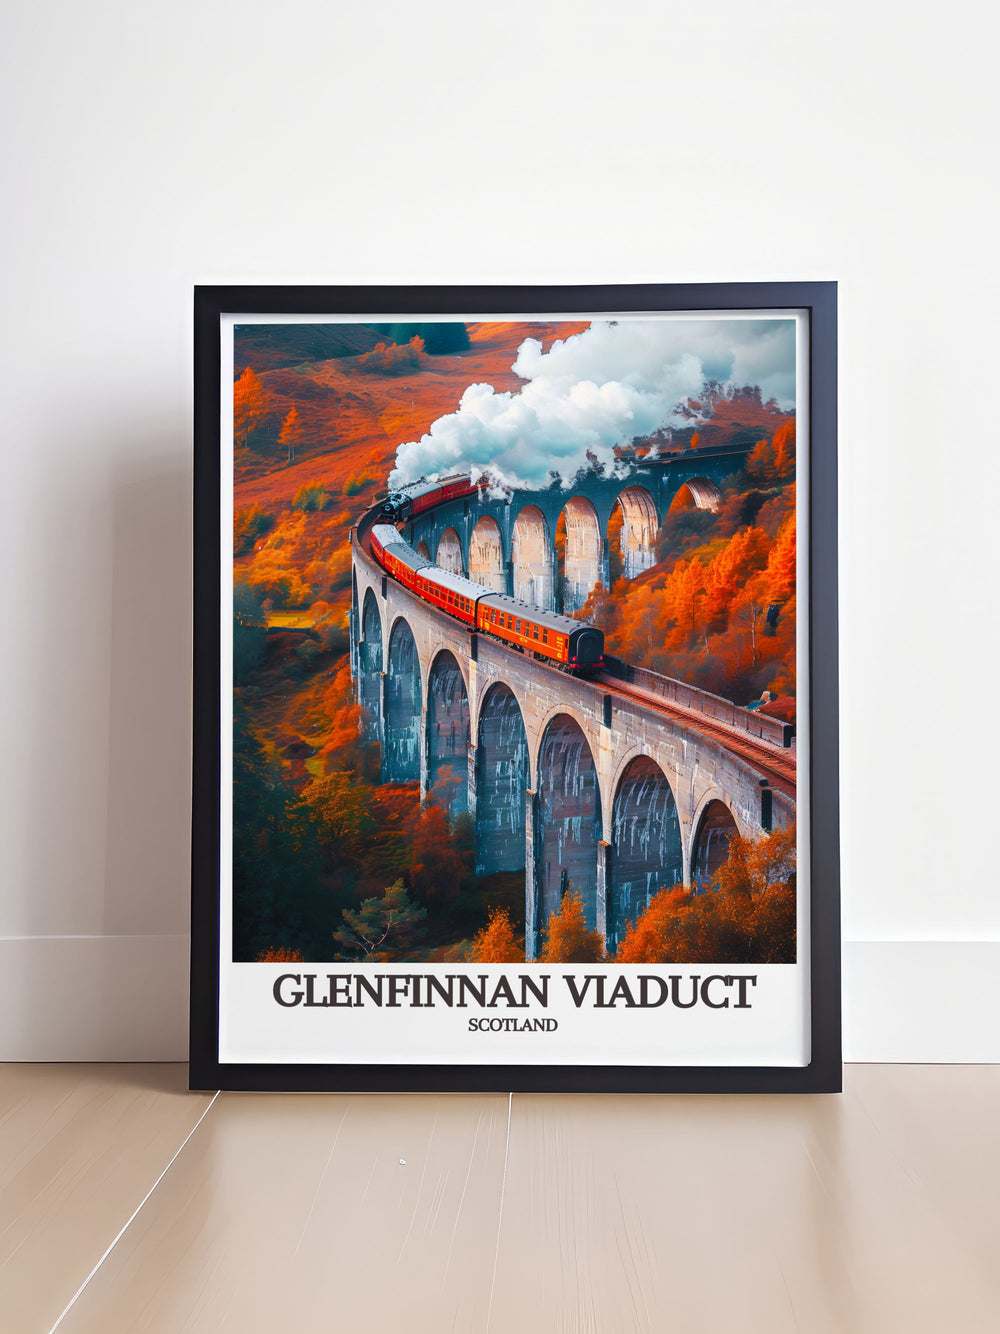 Framed art print of the Glenfinnan Viaduct, showcasing the timeless beauty of its Victorian engineering amidst the scenic Scottish Highlands, an ideal piece for lovers of historical landmarks.